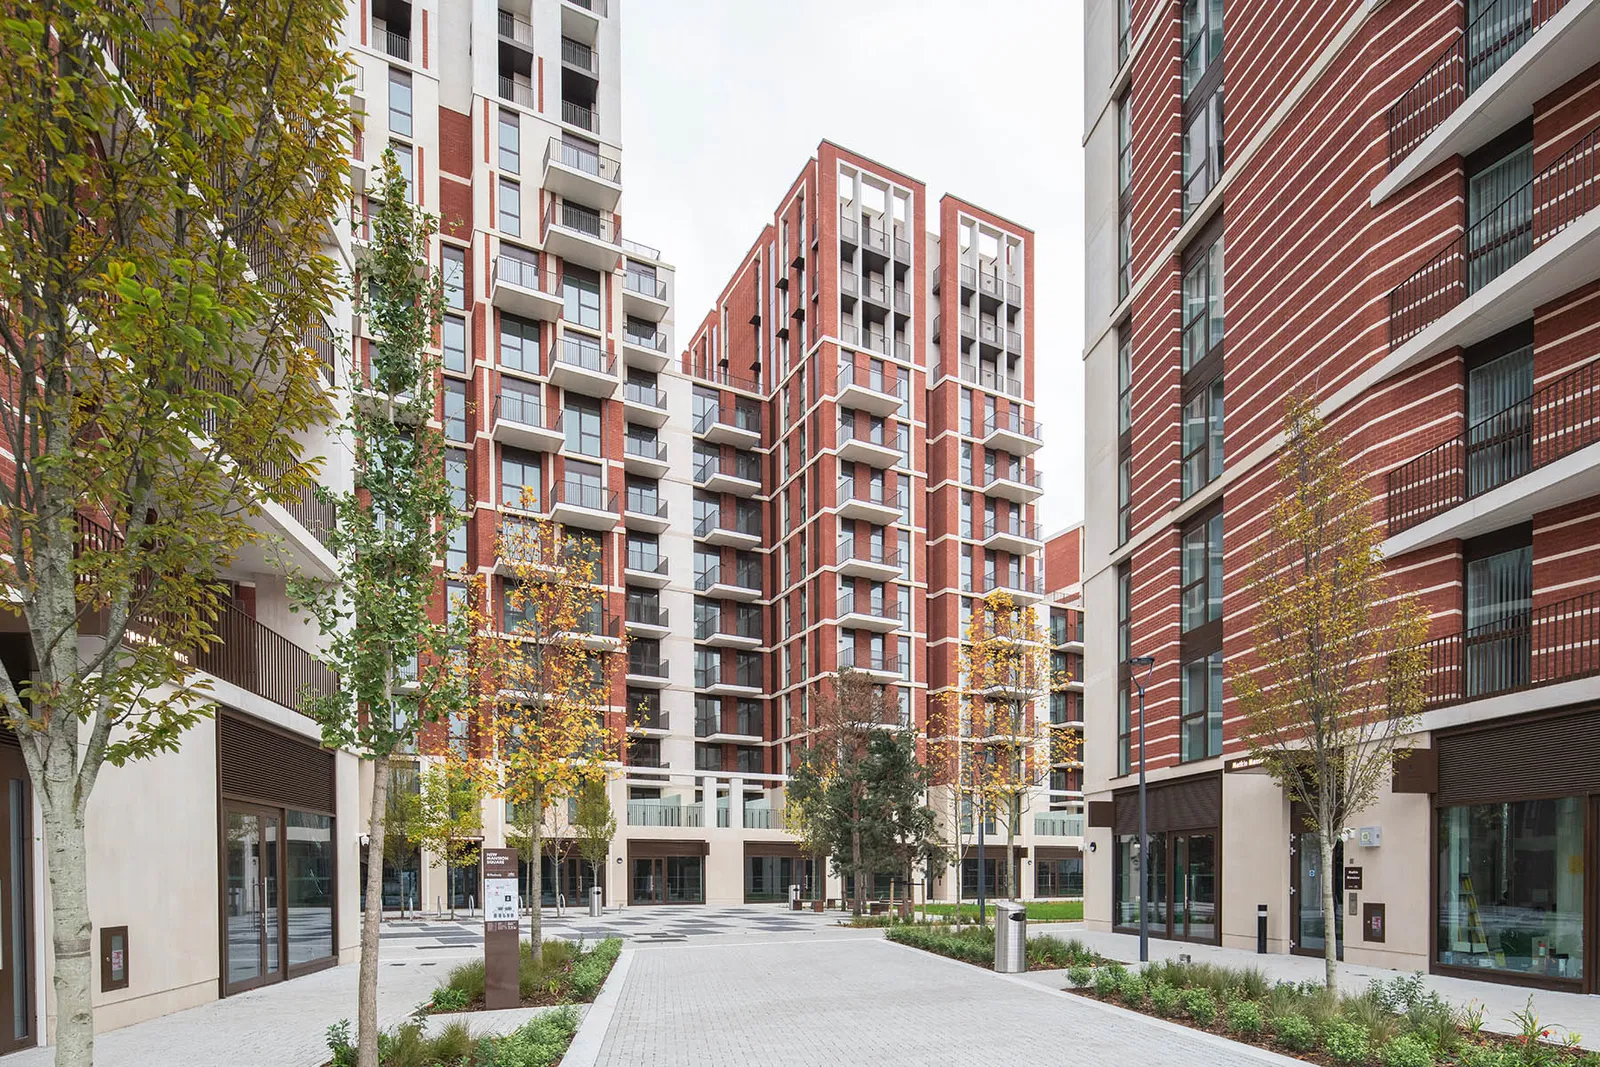 New Mansion Square battersea shared ownership wandsworth